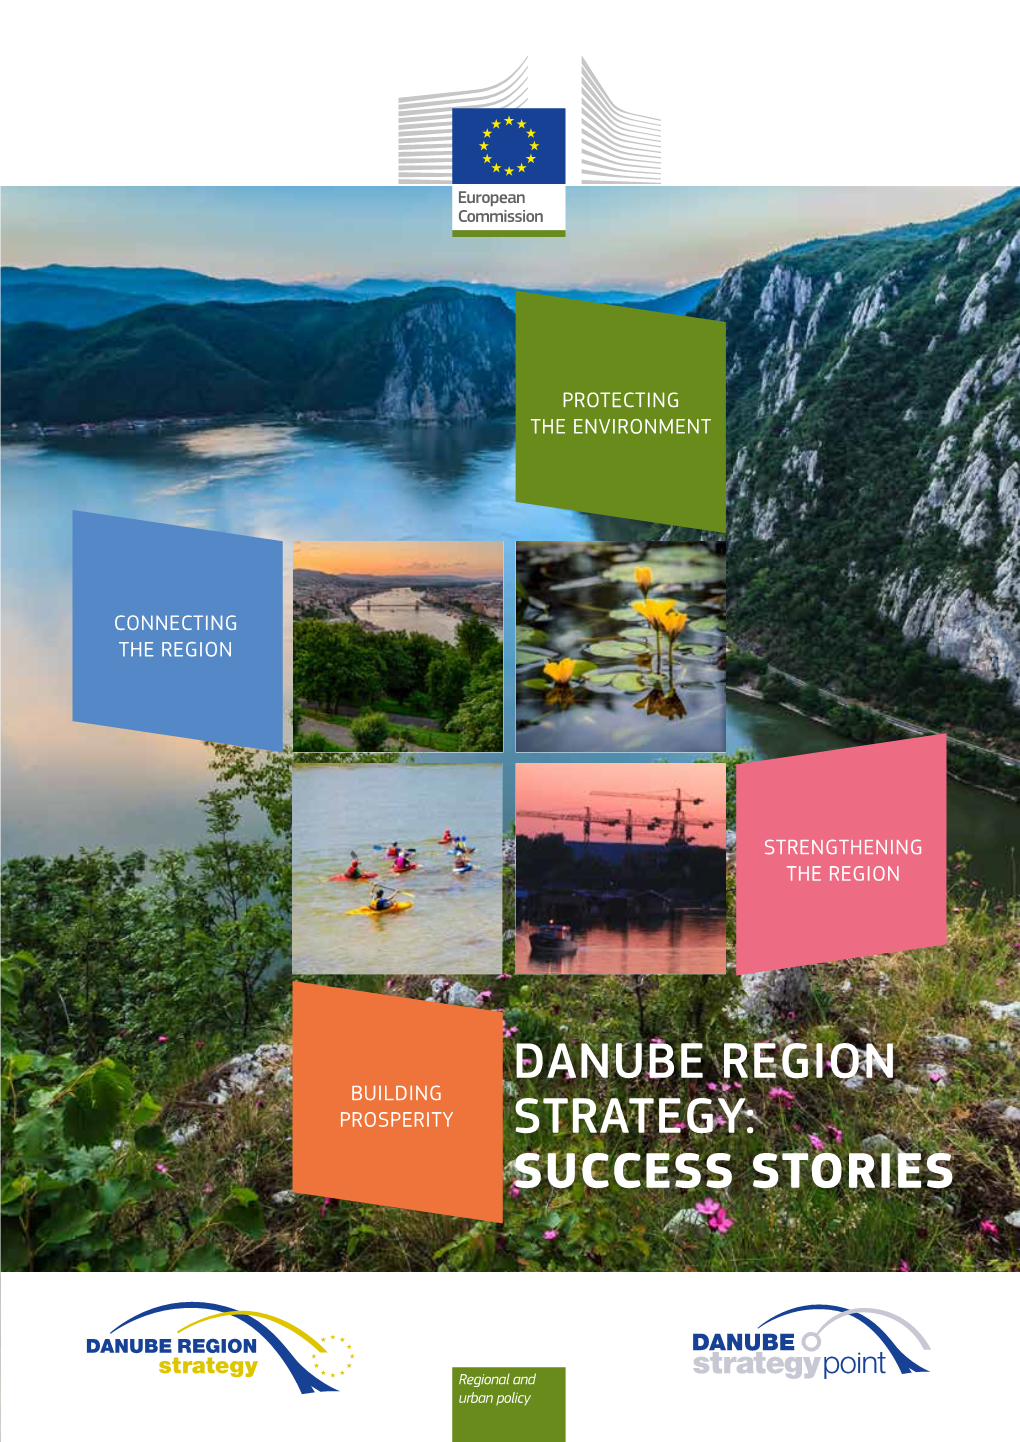 Danube Region Strategy: Success Stories Table of Content